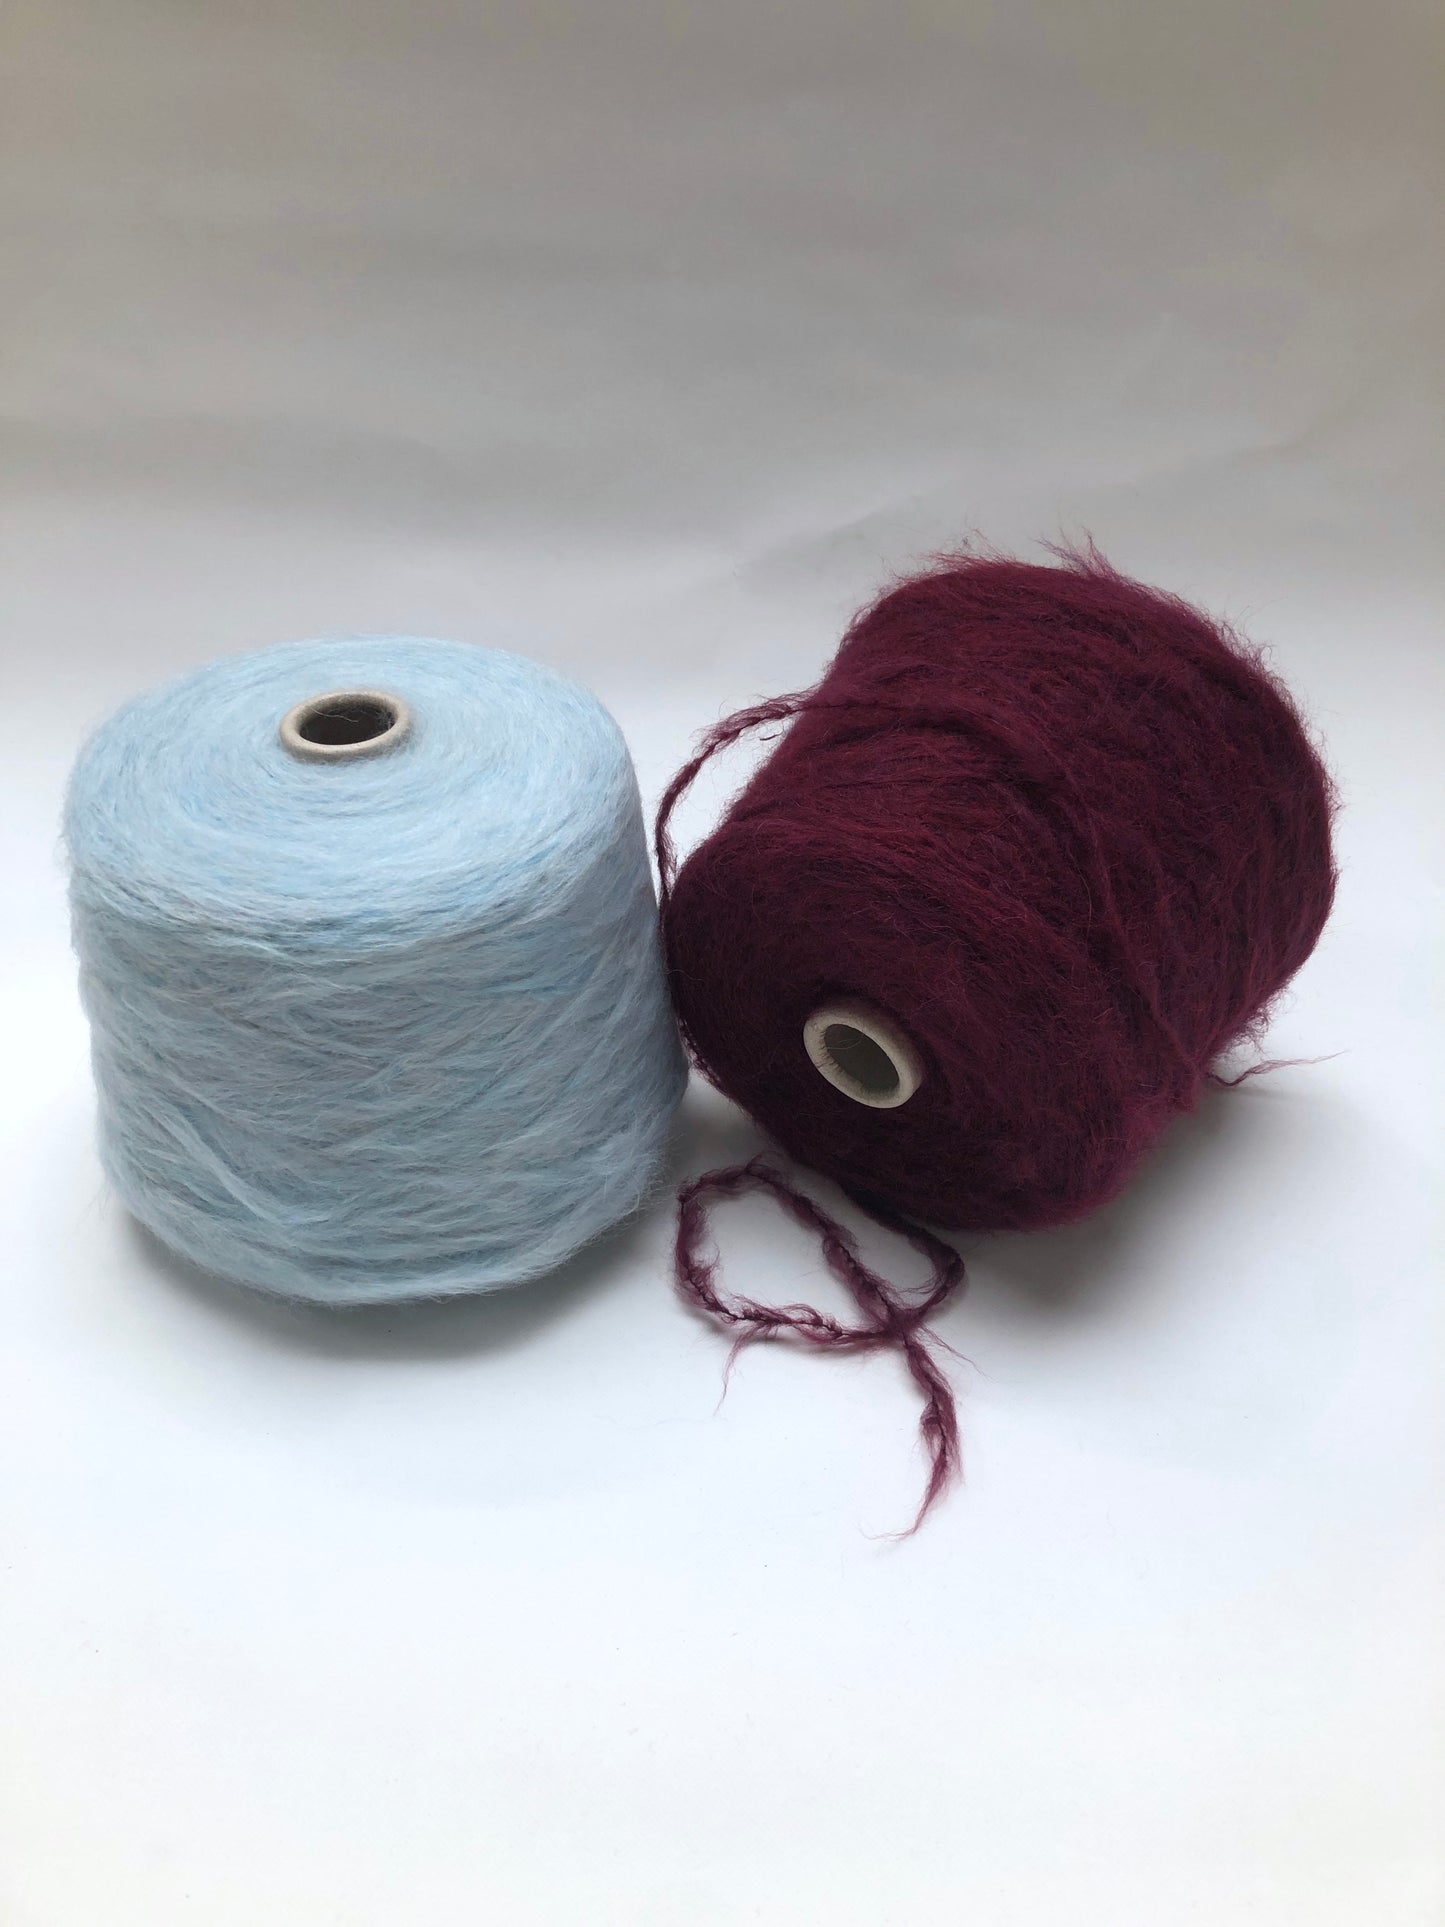 Yarn Cones, Blue and Bordeaux, NM 1/2200